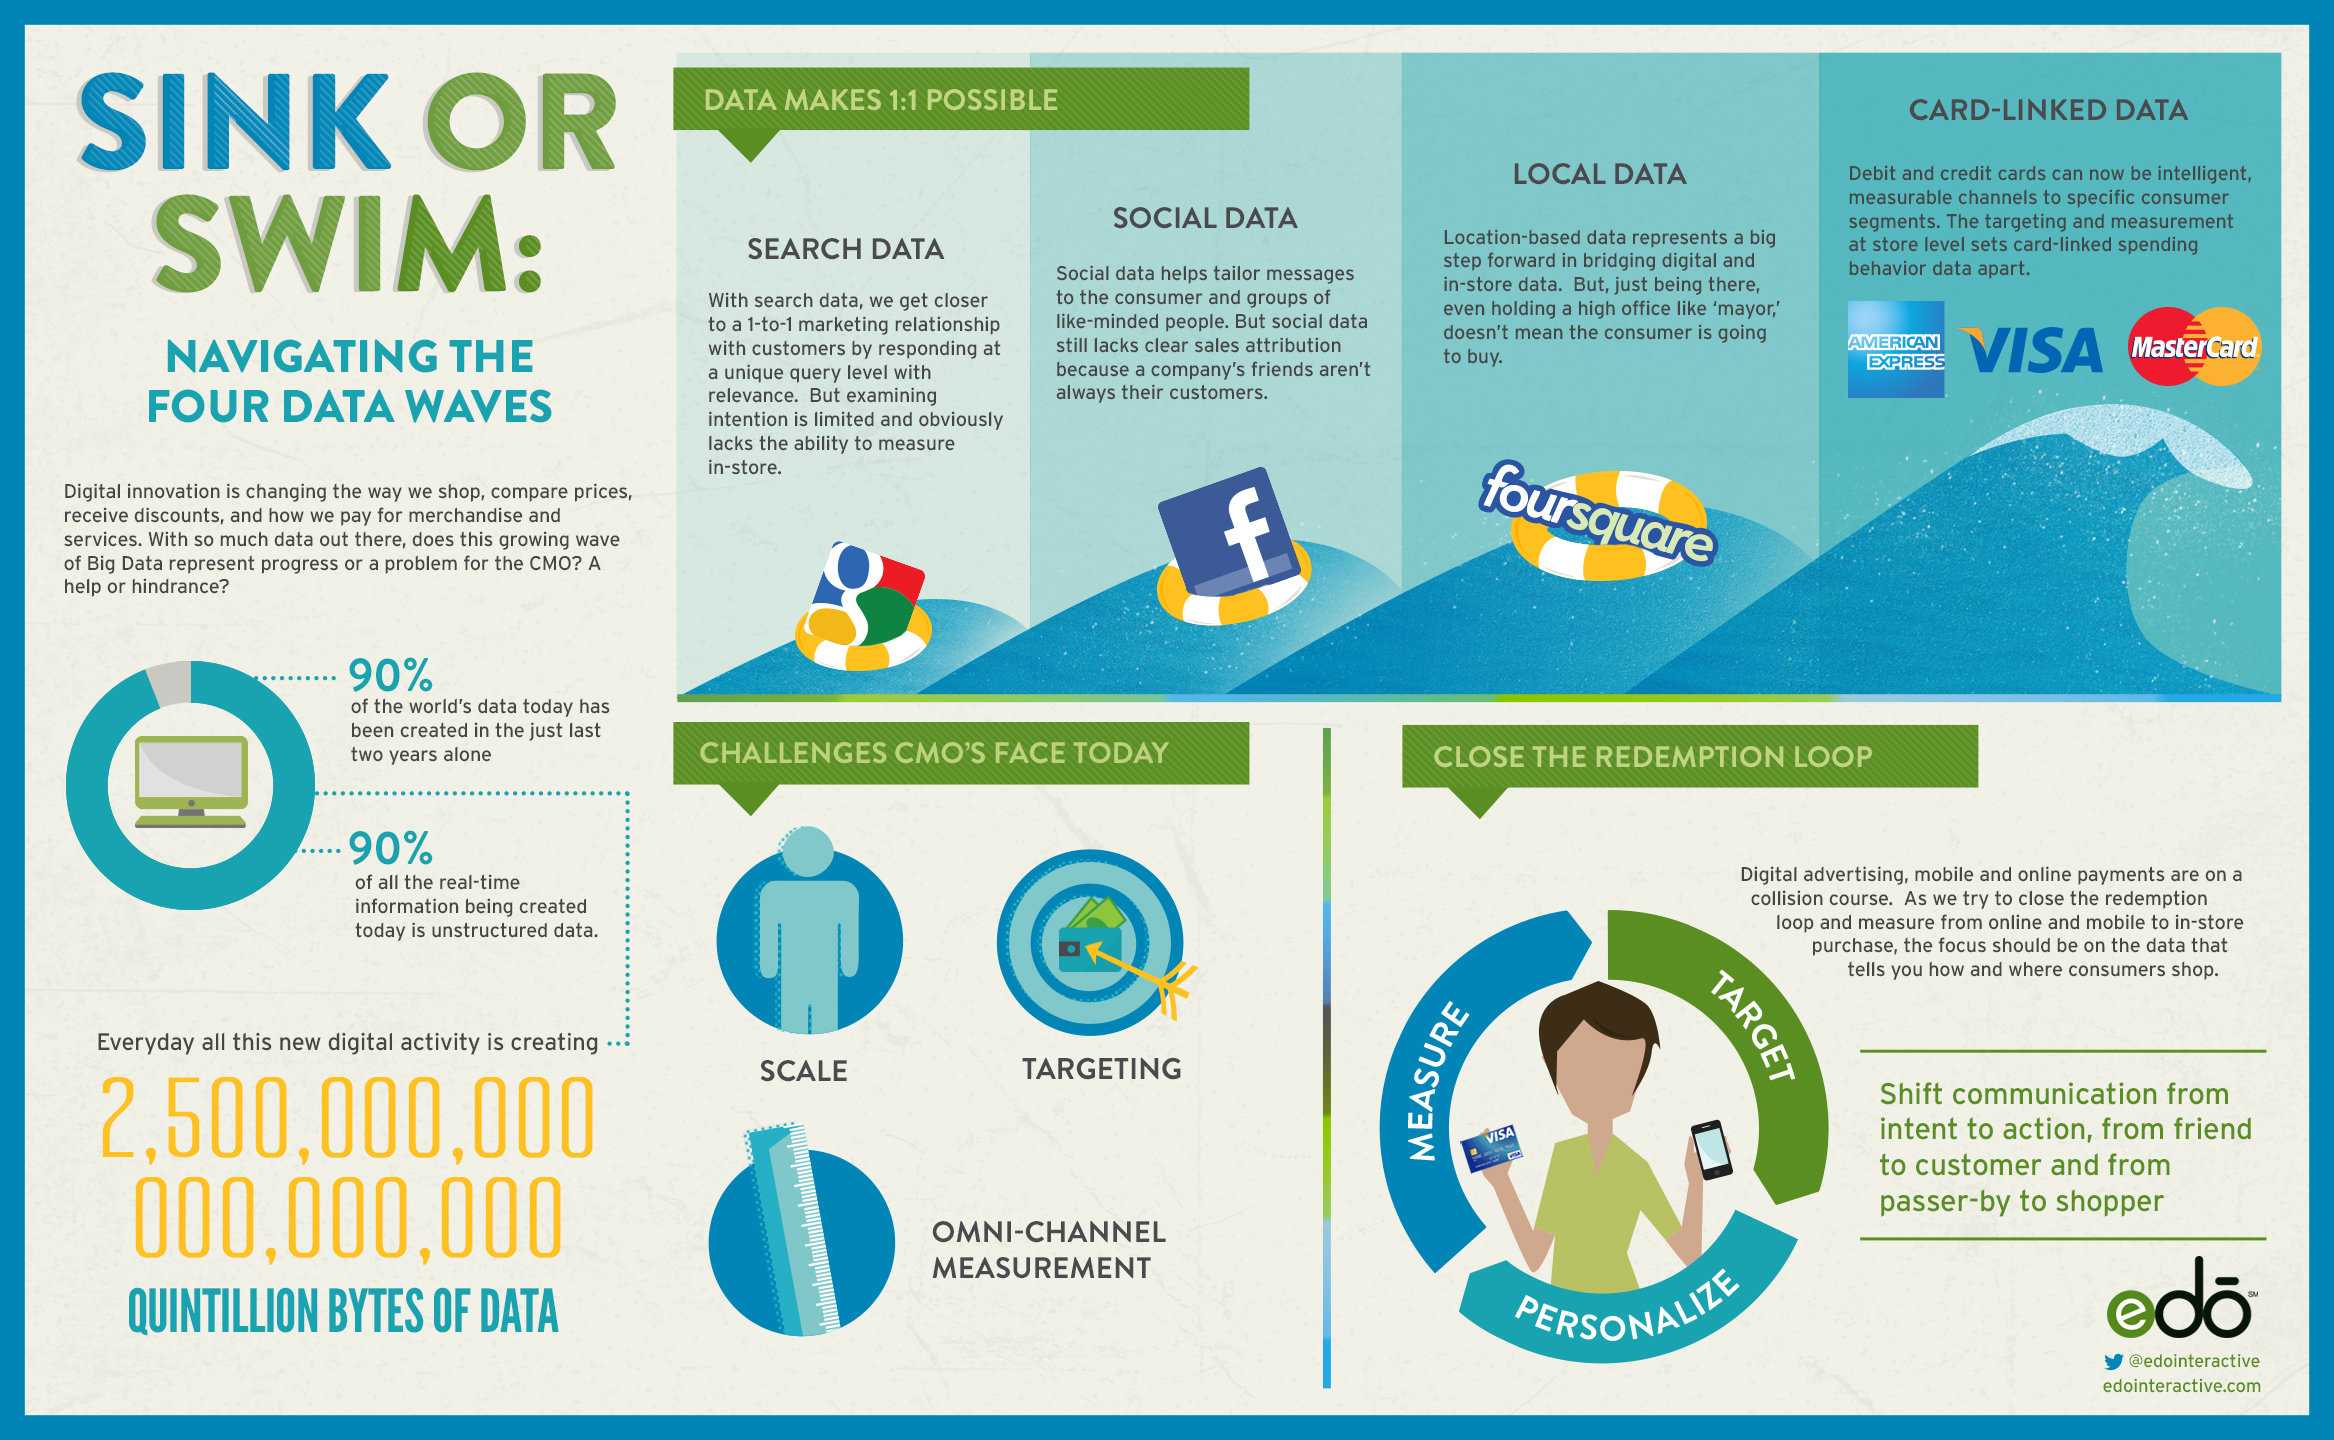 Sink or Swim: Navigating The Four Data Waves